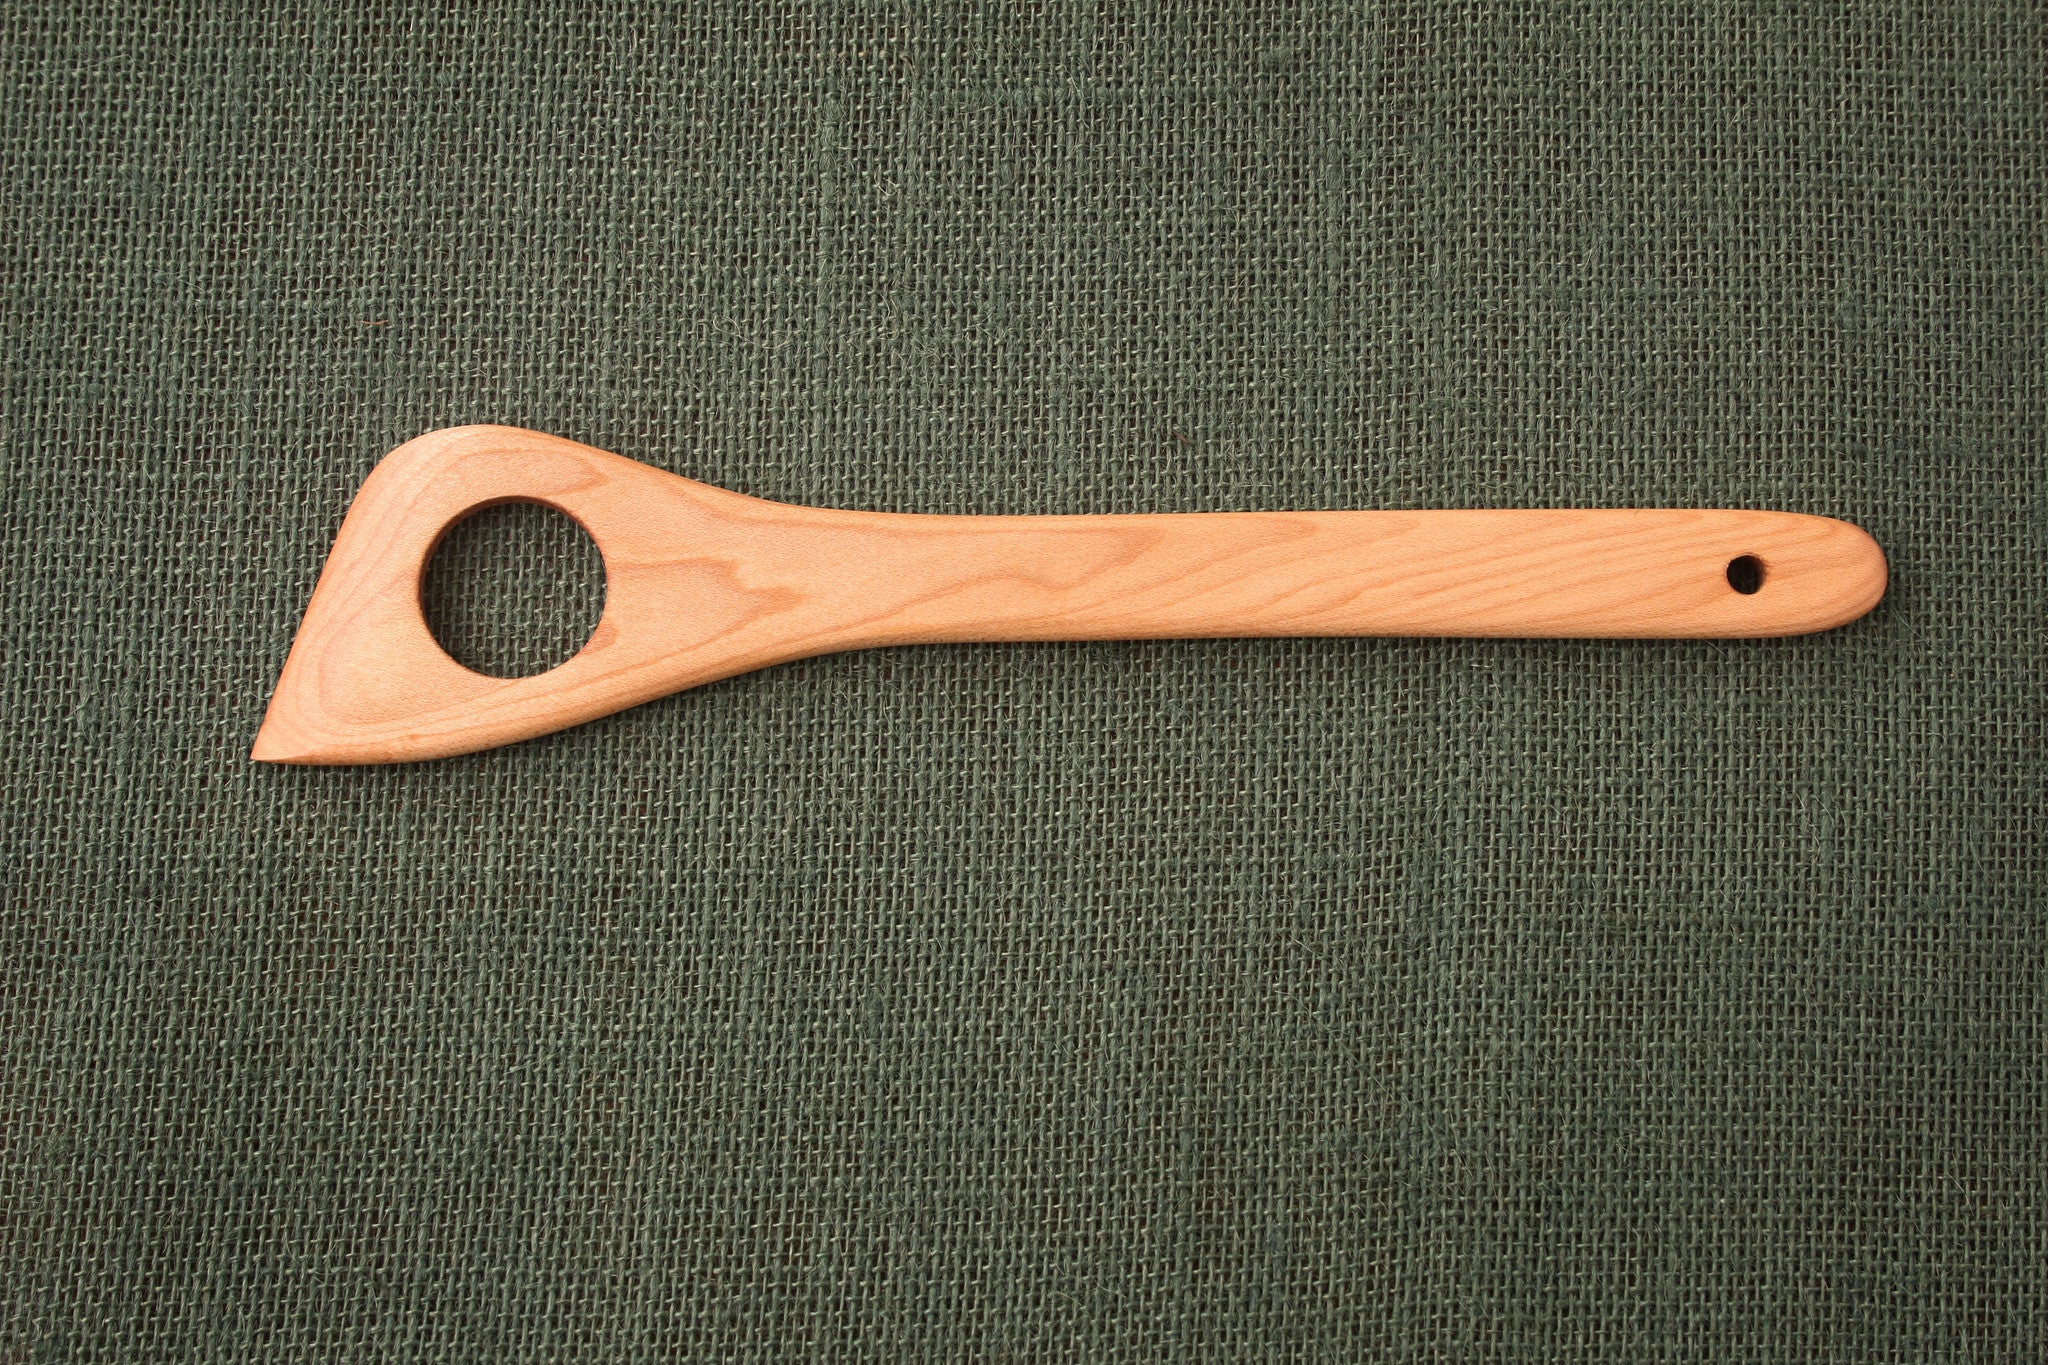 Wooden Spatula with Hole  New Hampshire Bowl and Board